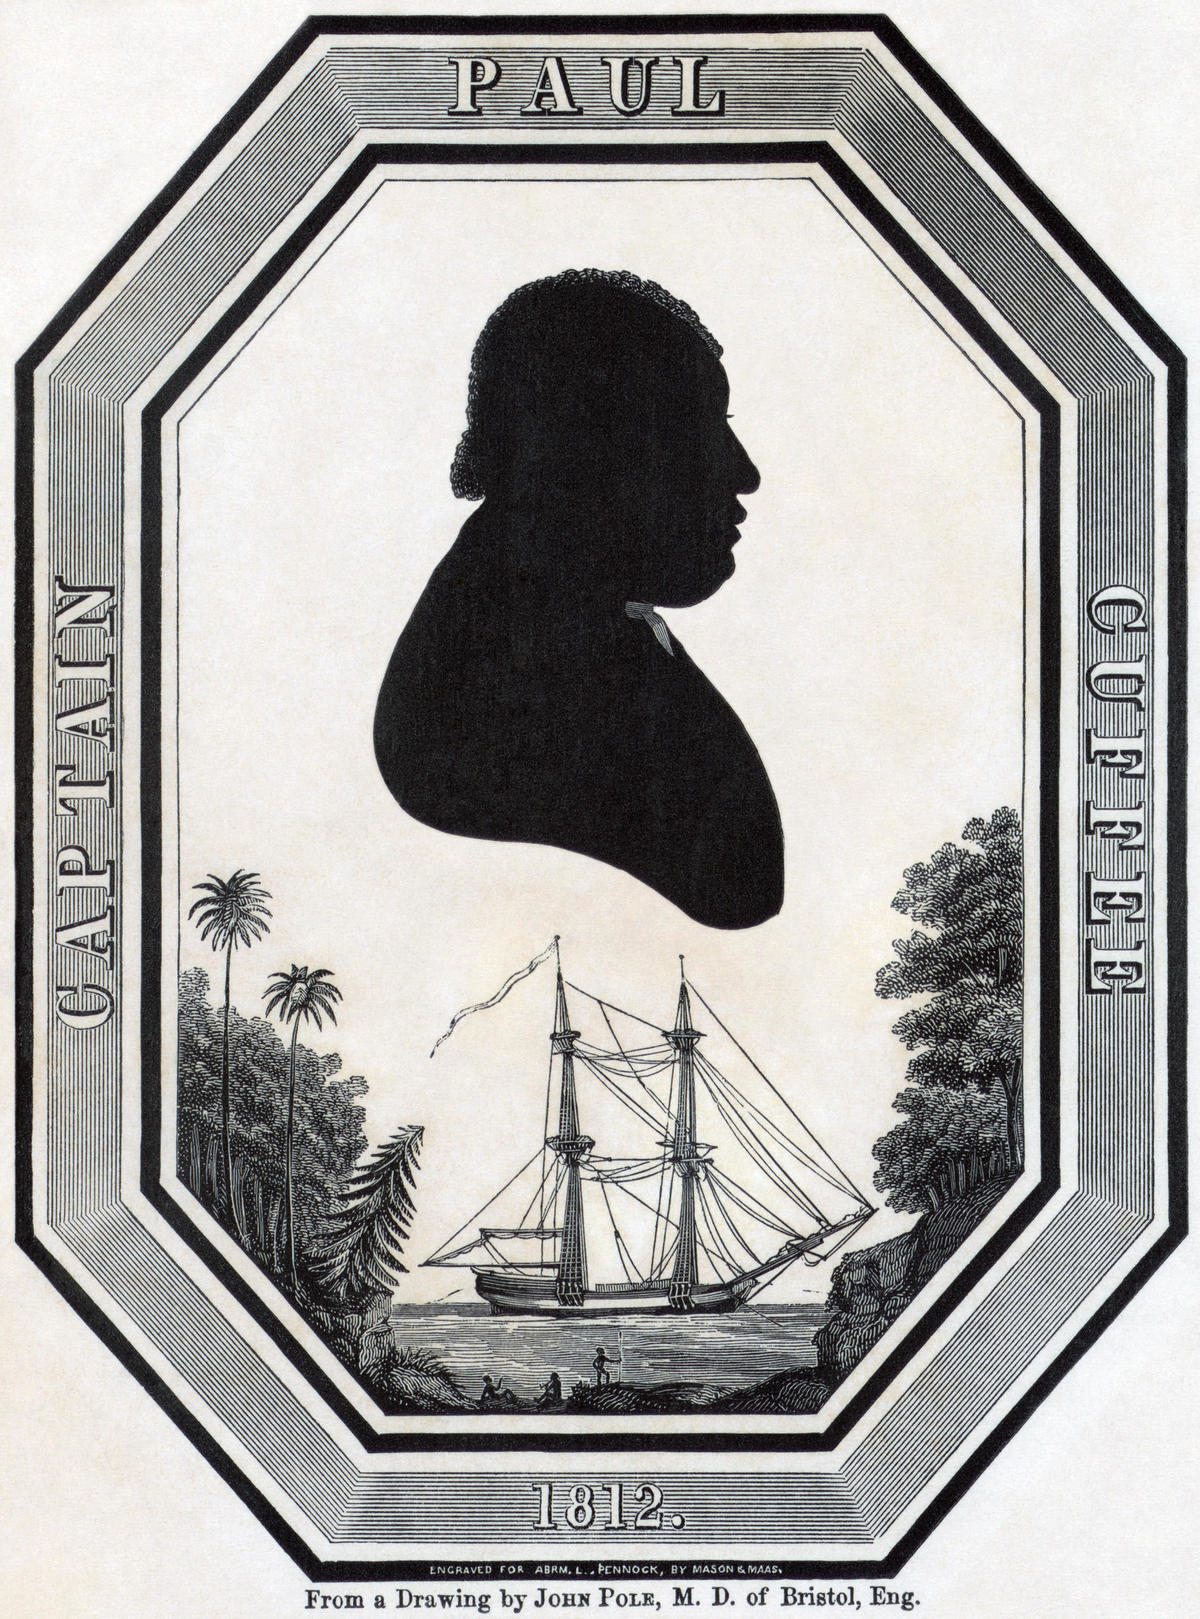 A 19th century engraving of the silhouette of Captain Paul Cuffee over an image of a sailing ship surrounded by palm and other trees with the date 1812 below.